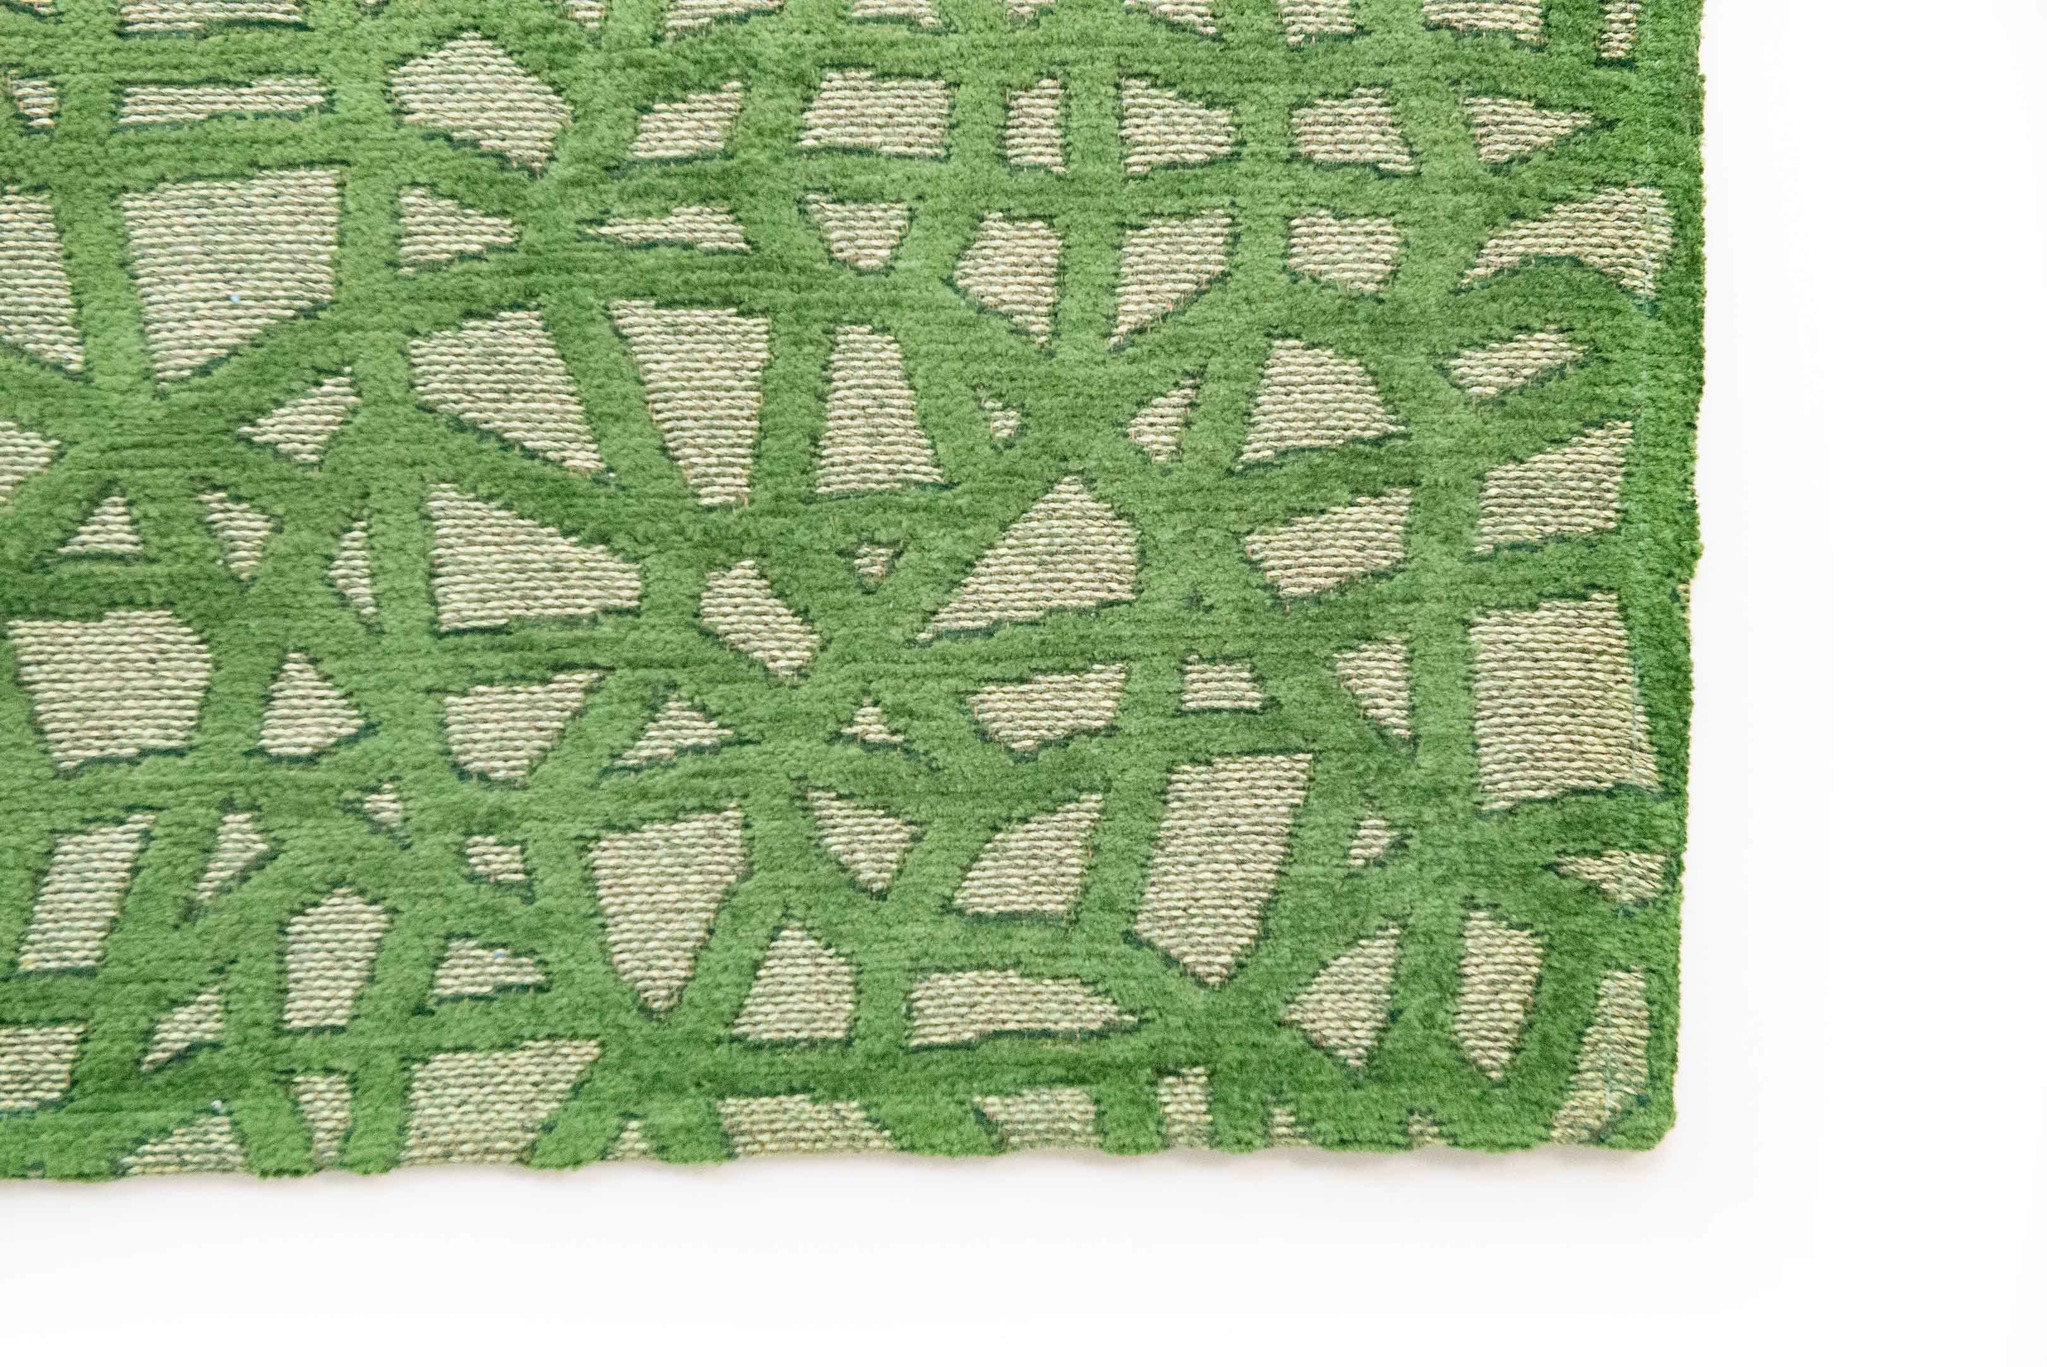 Green Checkered Flatwoven Rug ☞ Size: 5' 7" x 8' (170 x 240 cm)